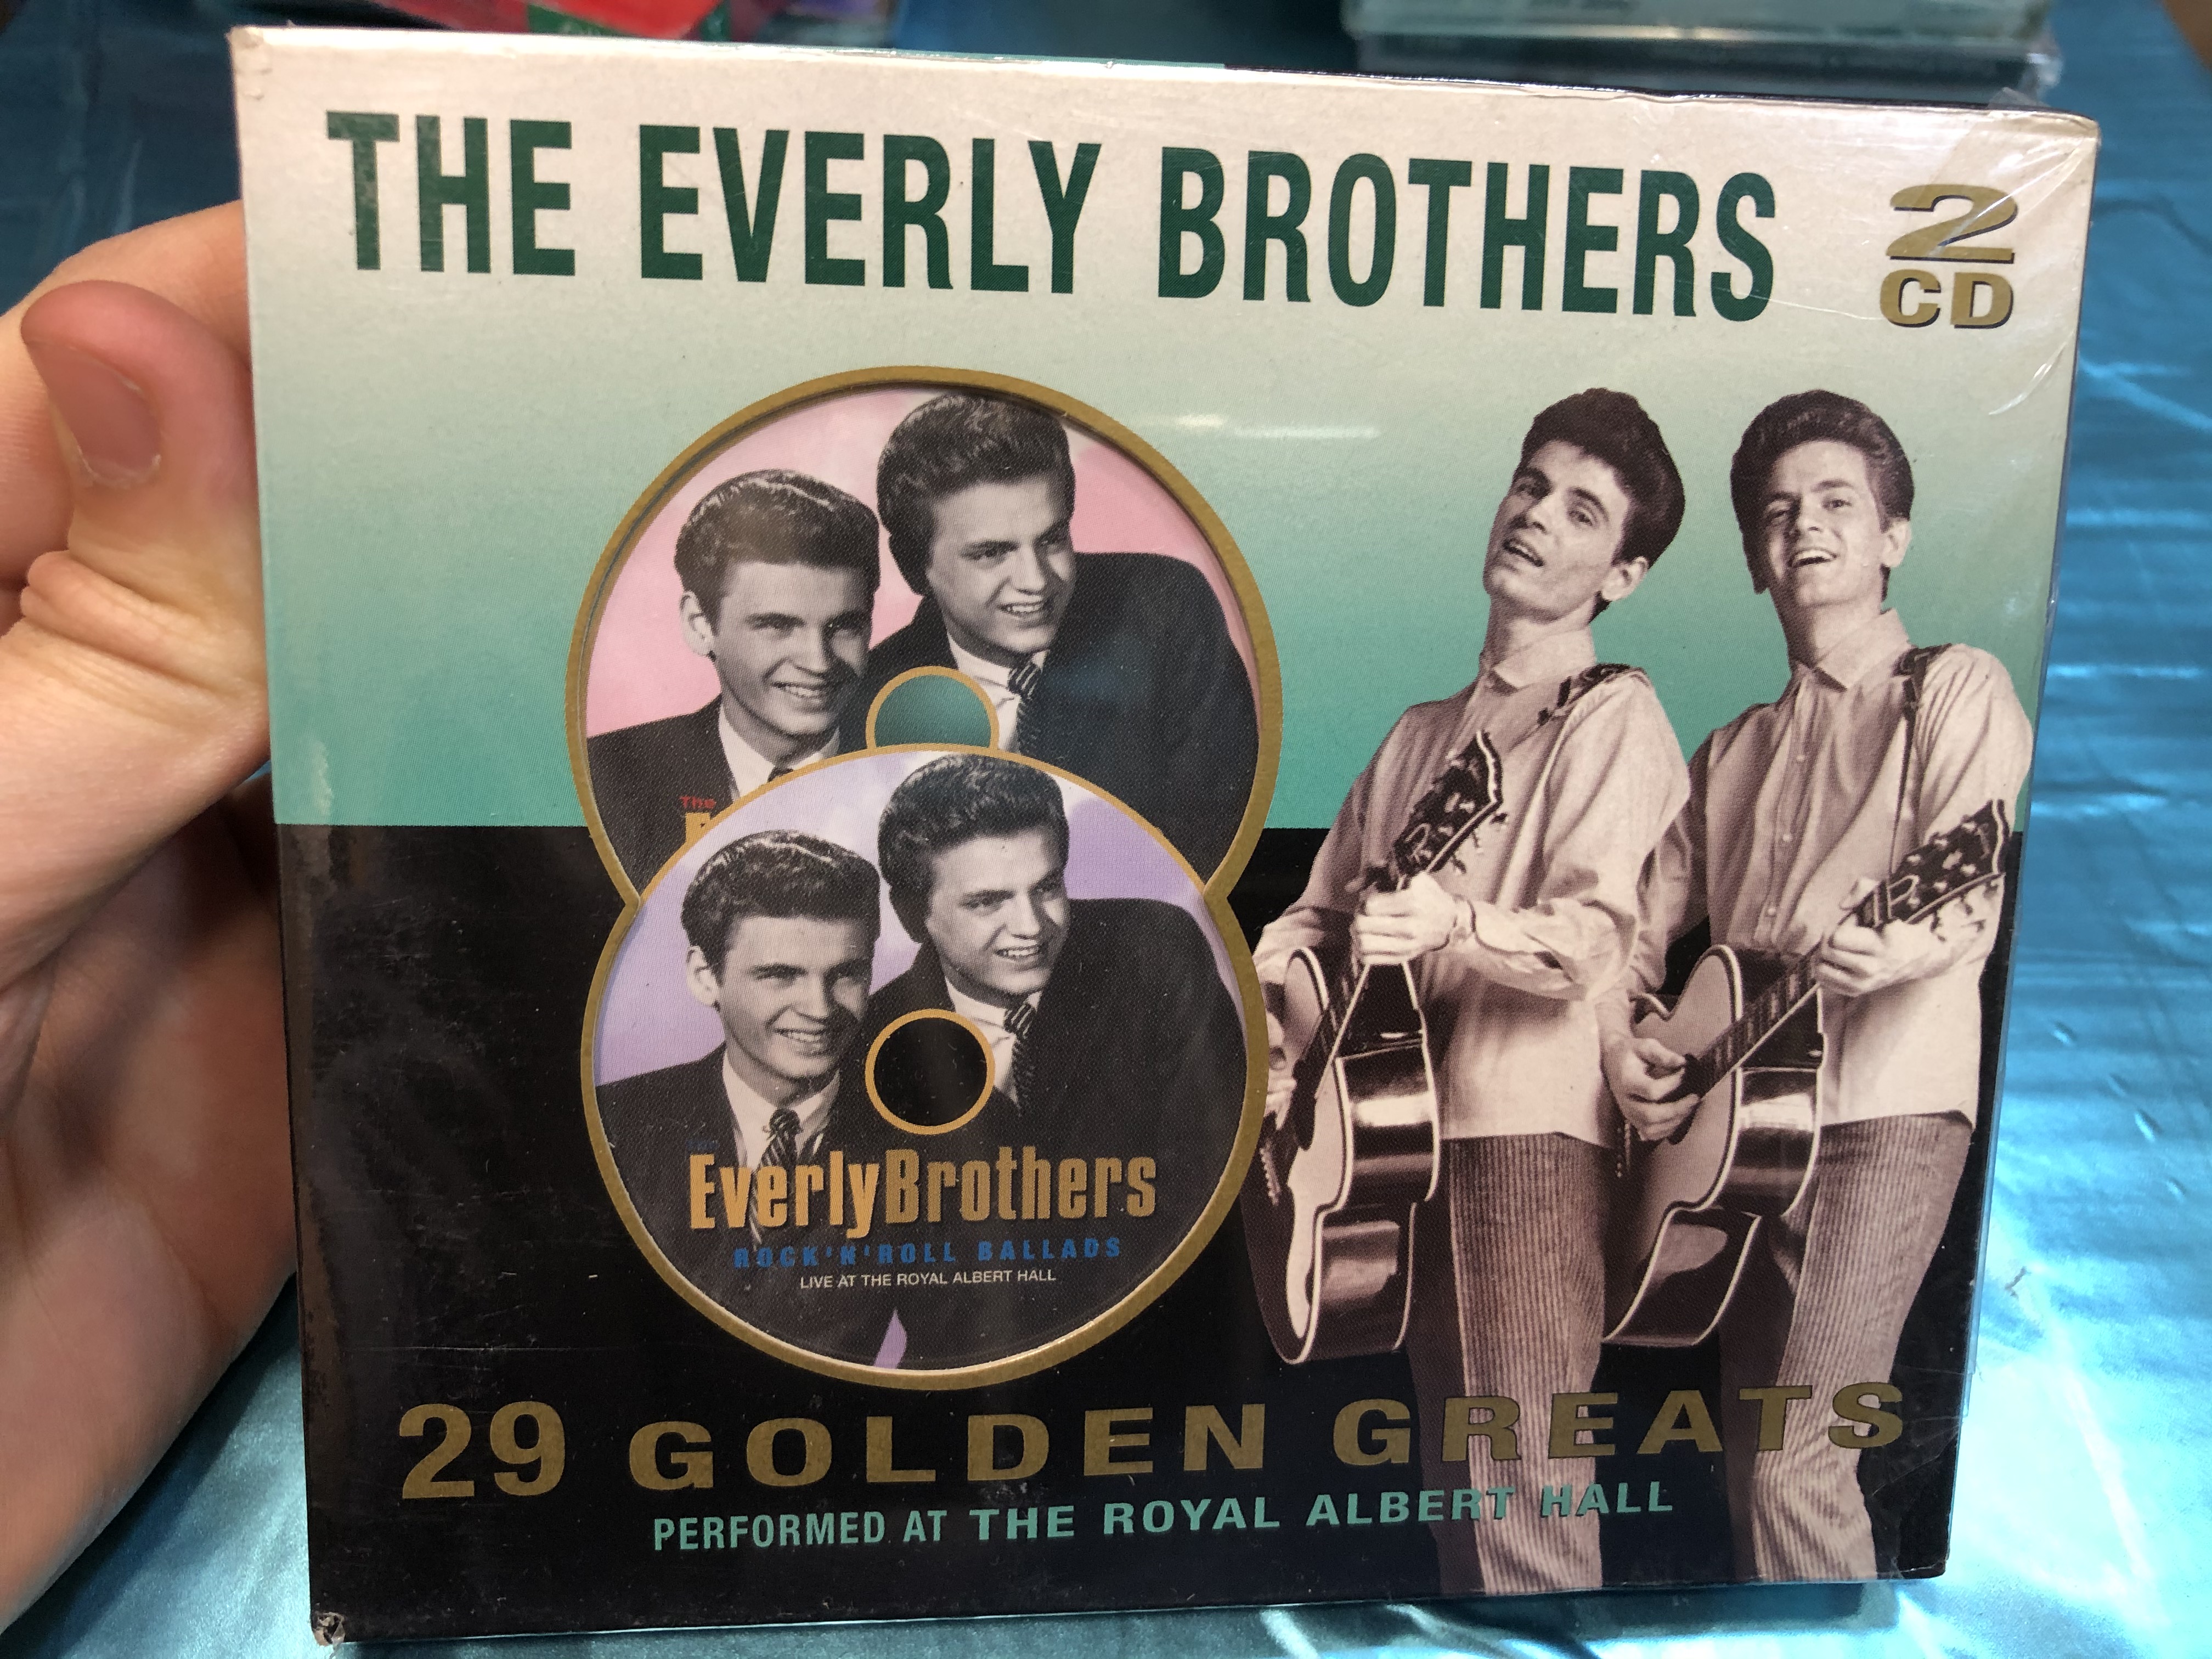 the-everly-brothers-29-golden-greats-performed-at-royal-albert-hall-prism-2x-audio-cd-2001-platbx-2221-1-.jpg